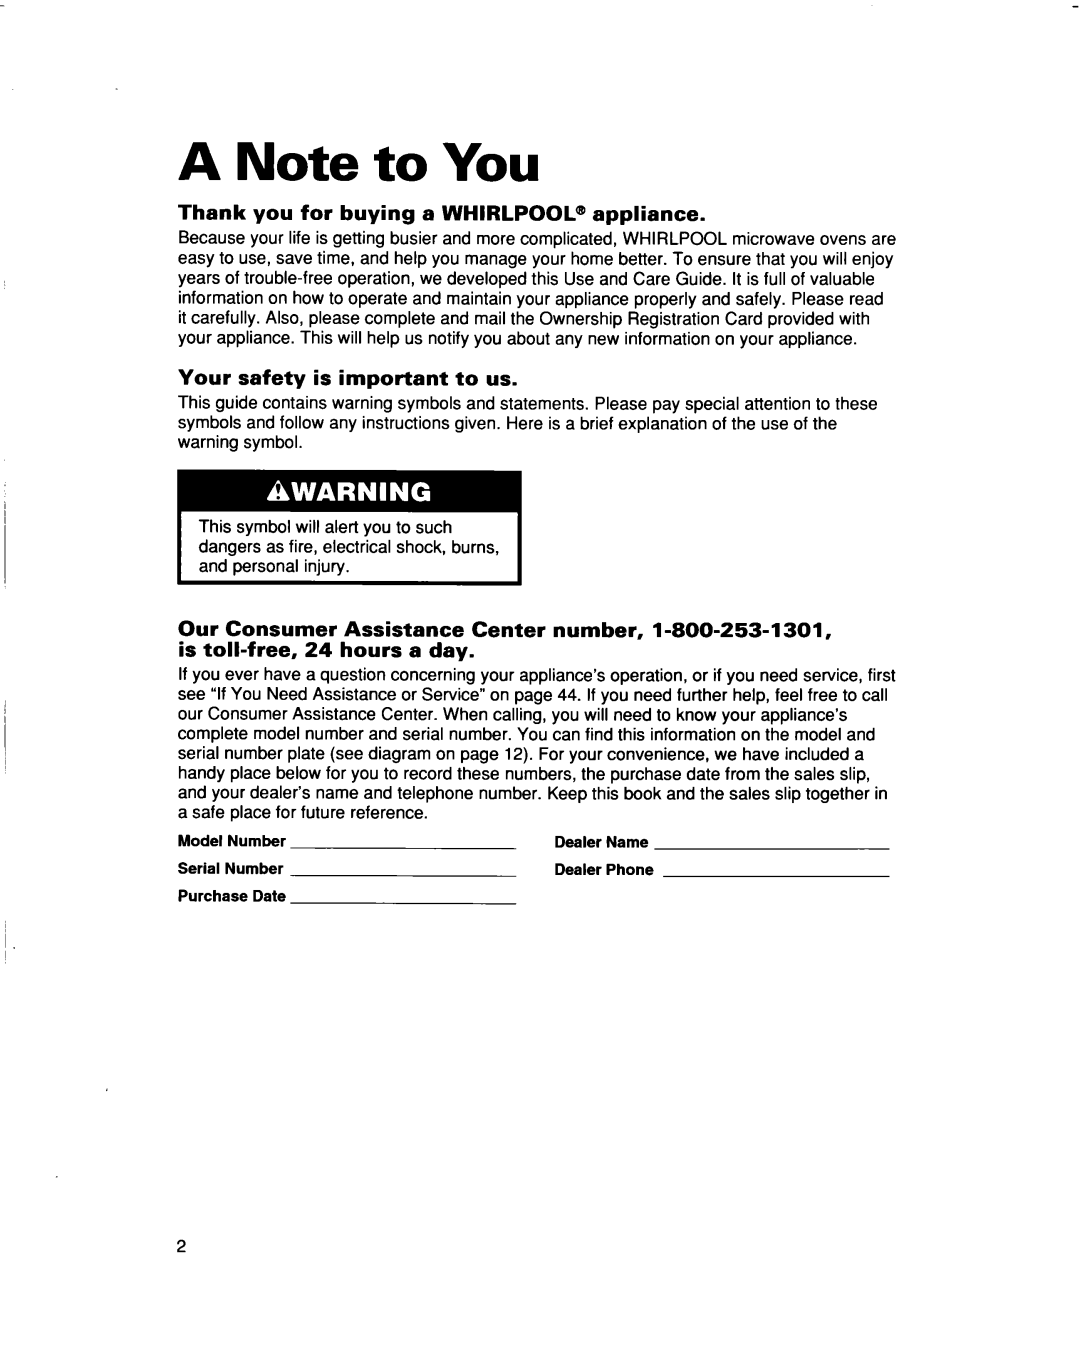 Whirlpool MT5120XAQ A Note to You, Thank you for buying a WHIRLPOOL@ appliance, Your safety is important to us 